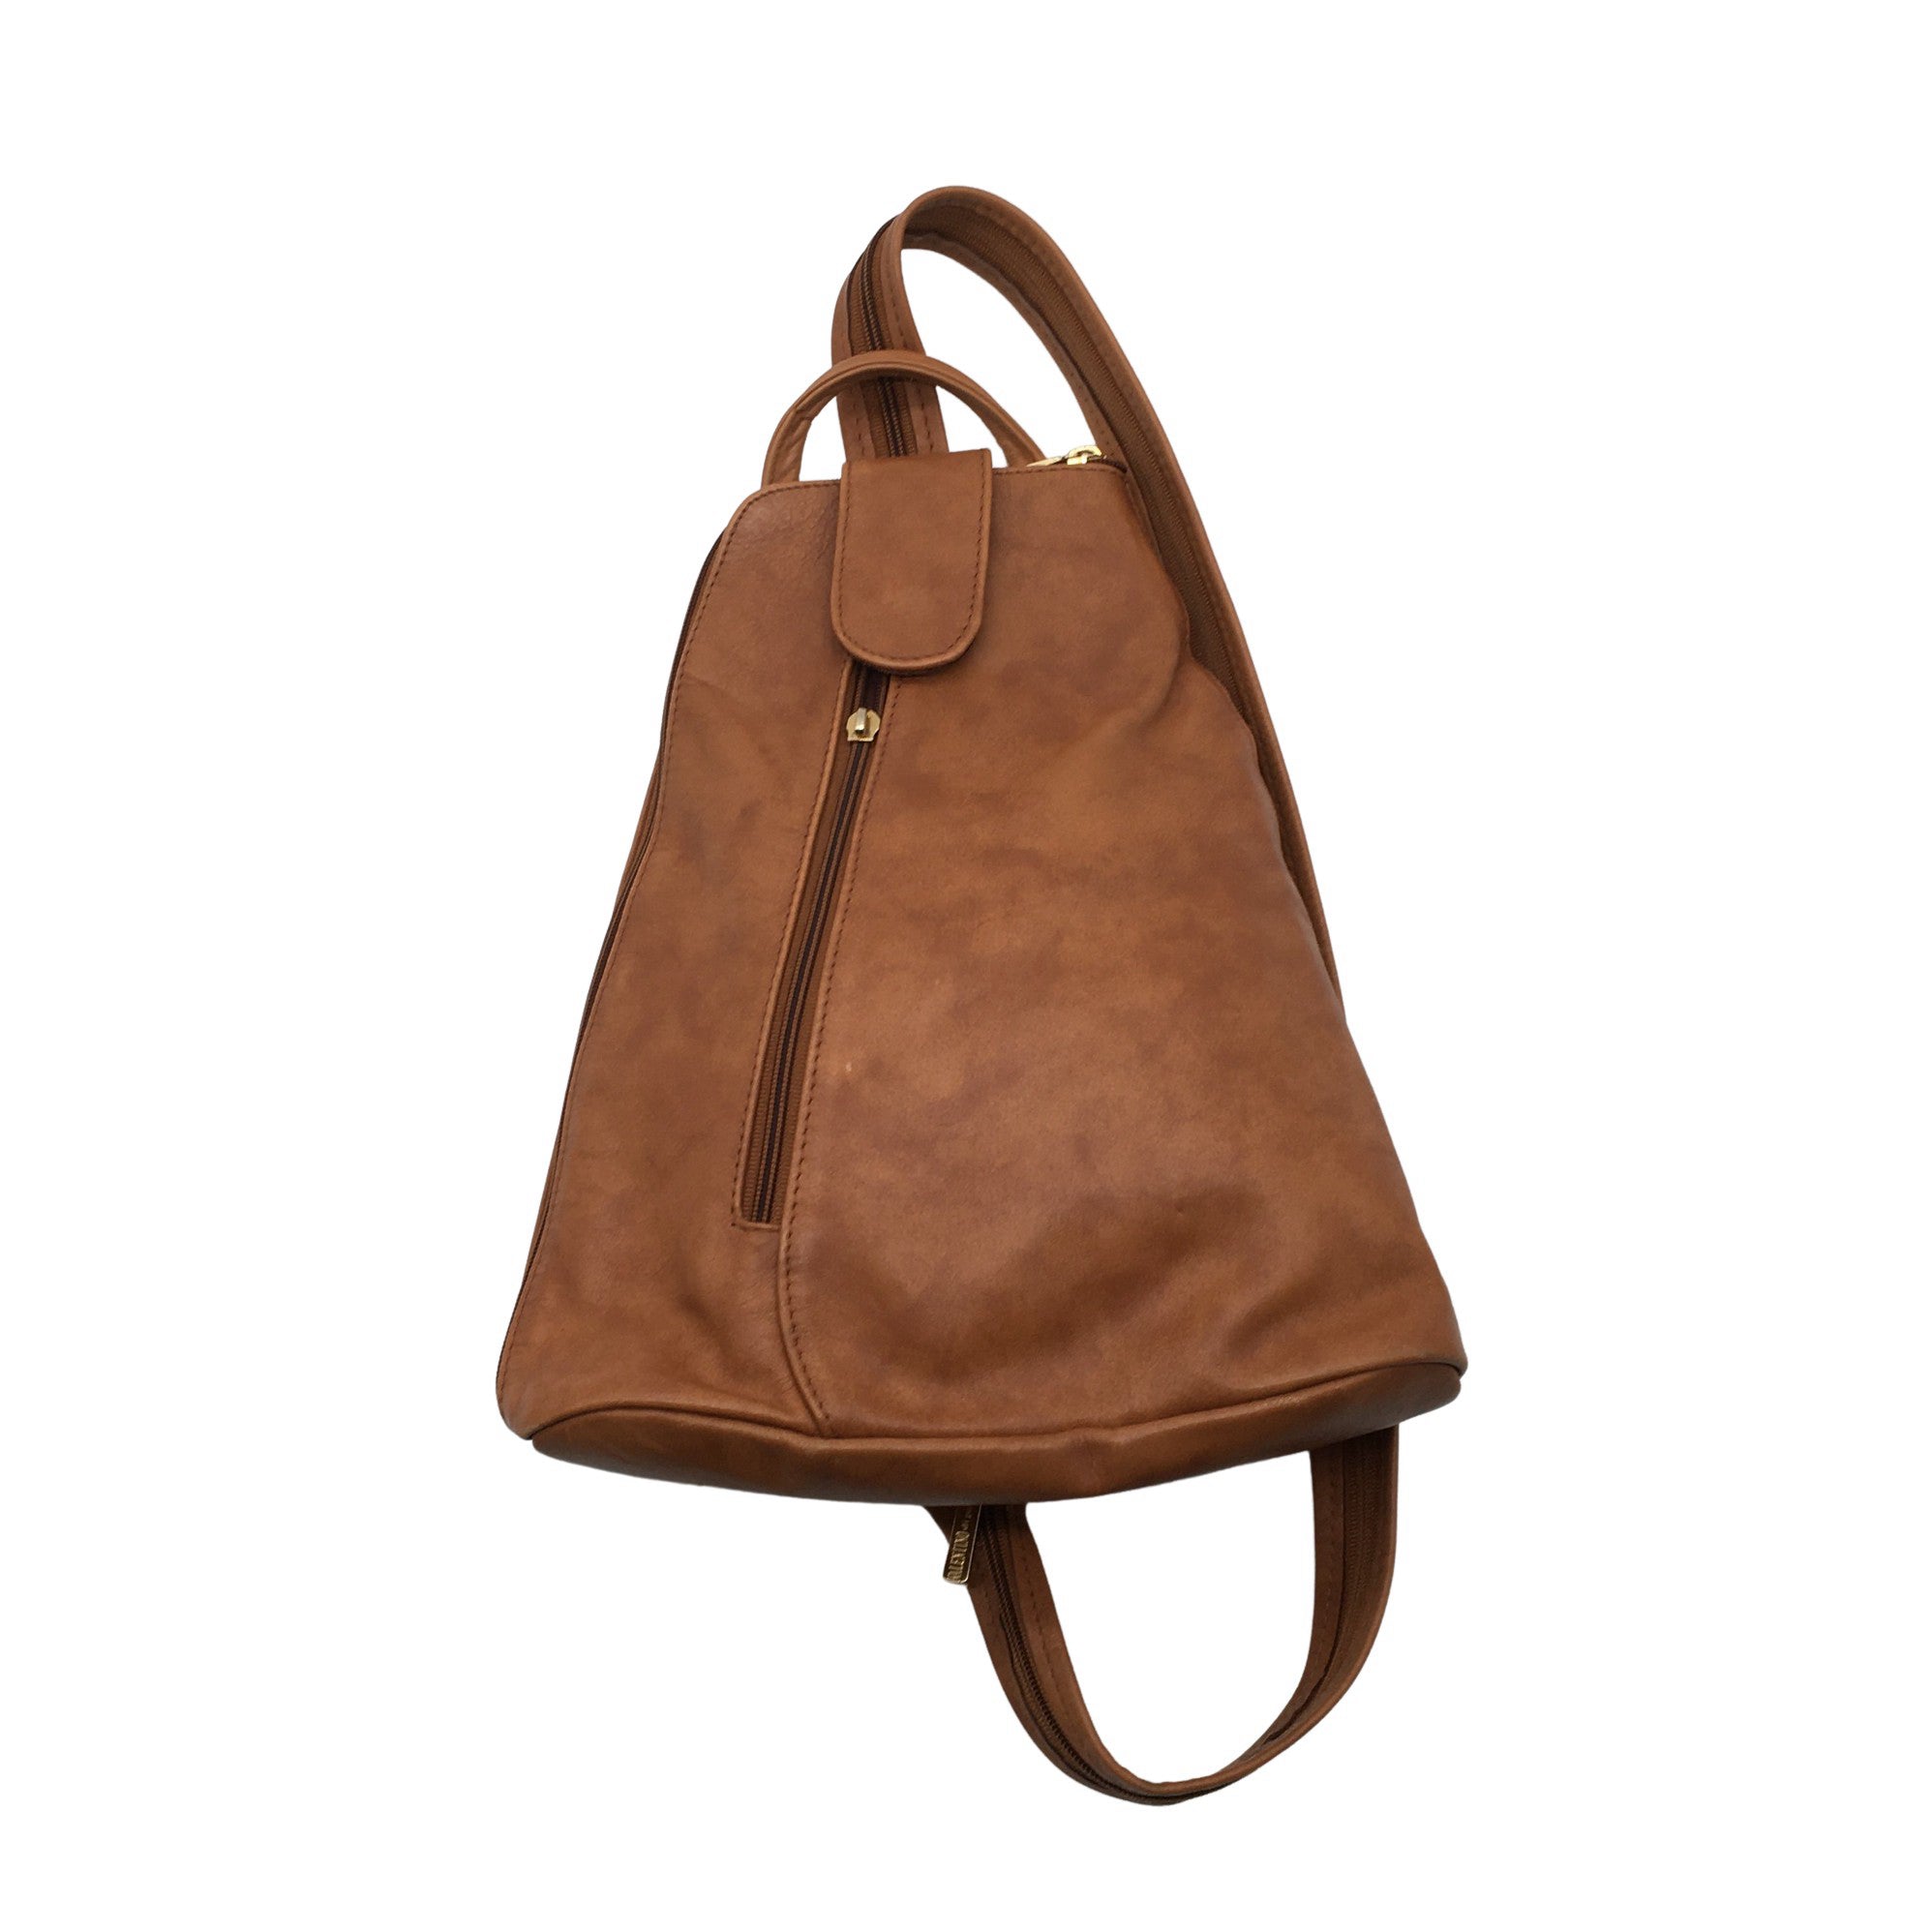 Women's Valentino Di Paolo Backpack, size Midi (Brown) | Emmy